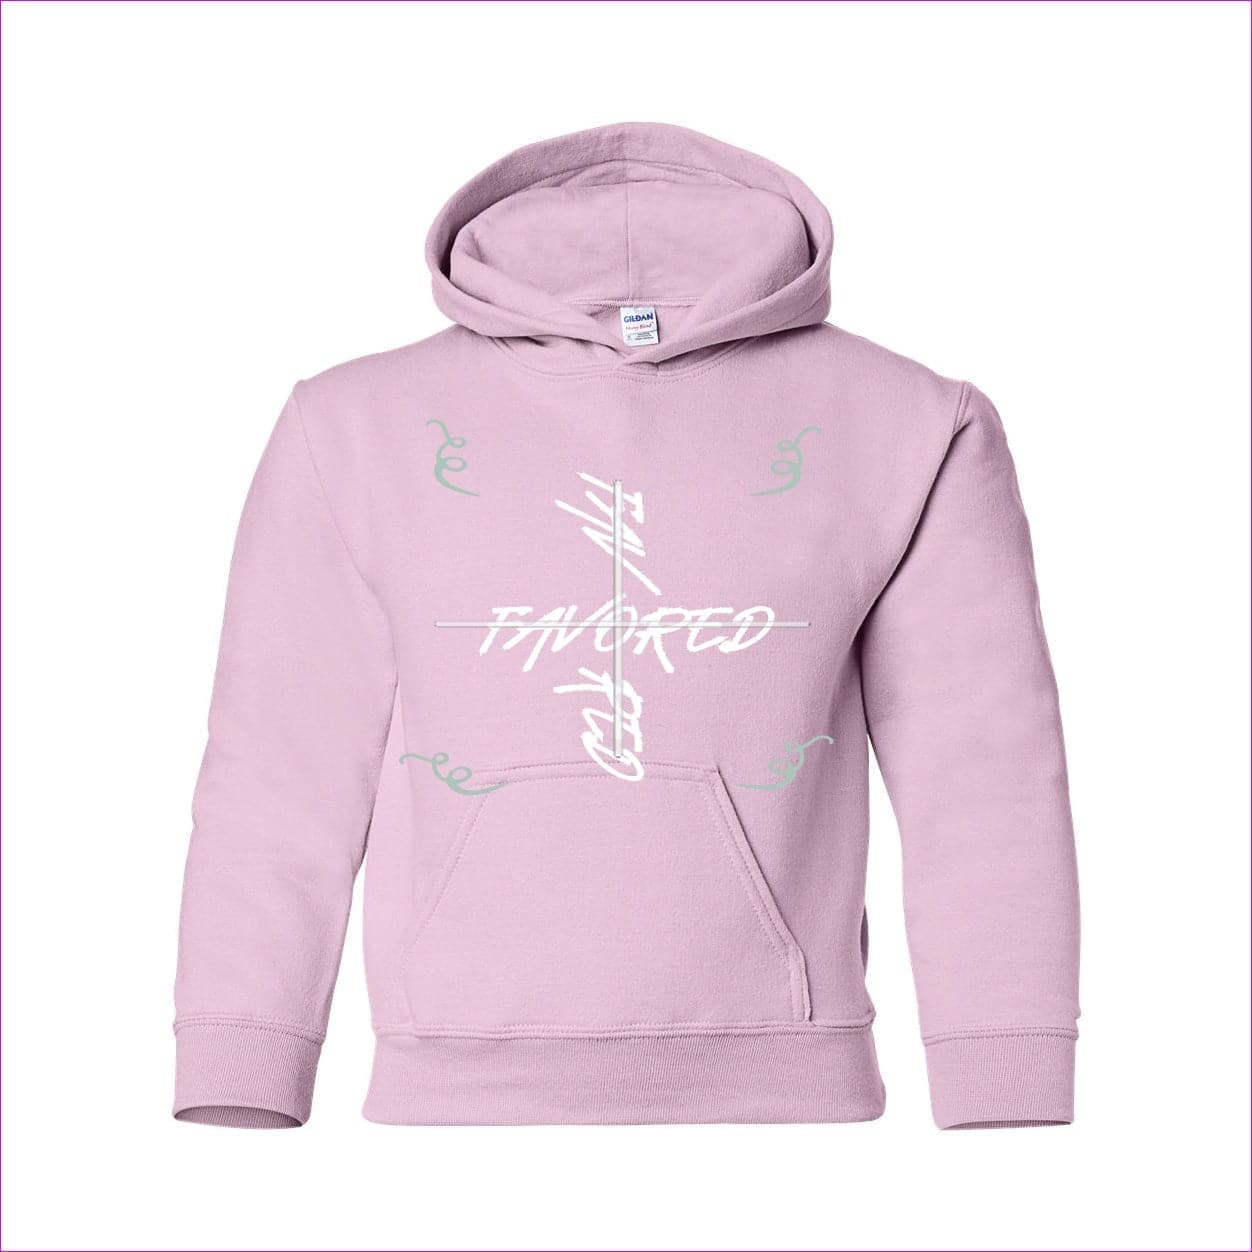 Light Pink - Favored 2 Heavy Blend Youth Hooded Sweatshirt - kids hoodies at TFC&H Co.